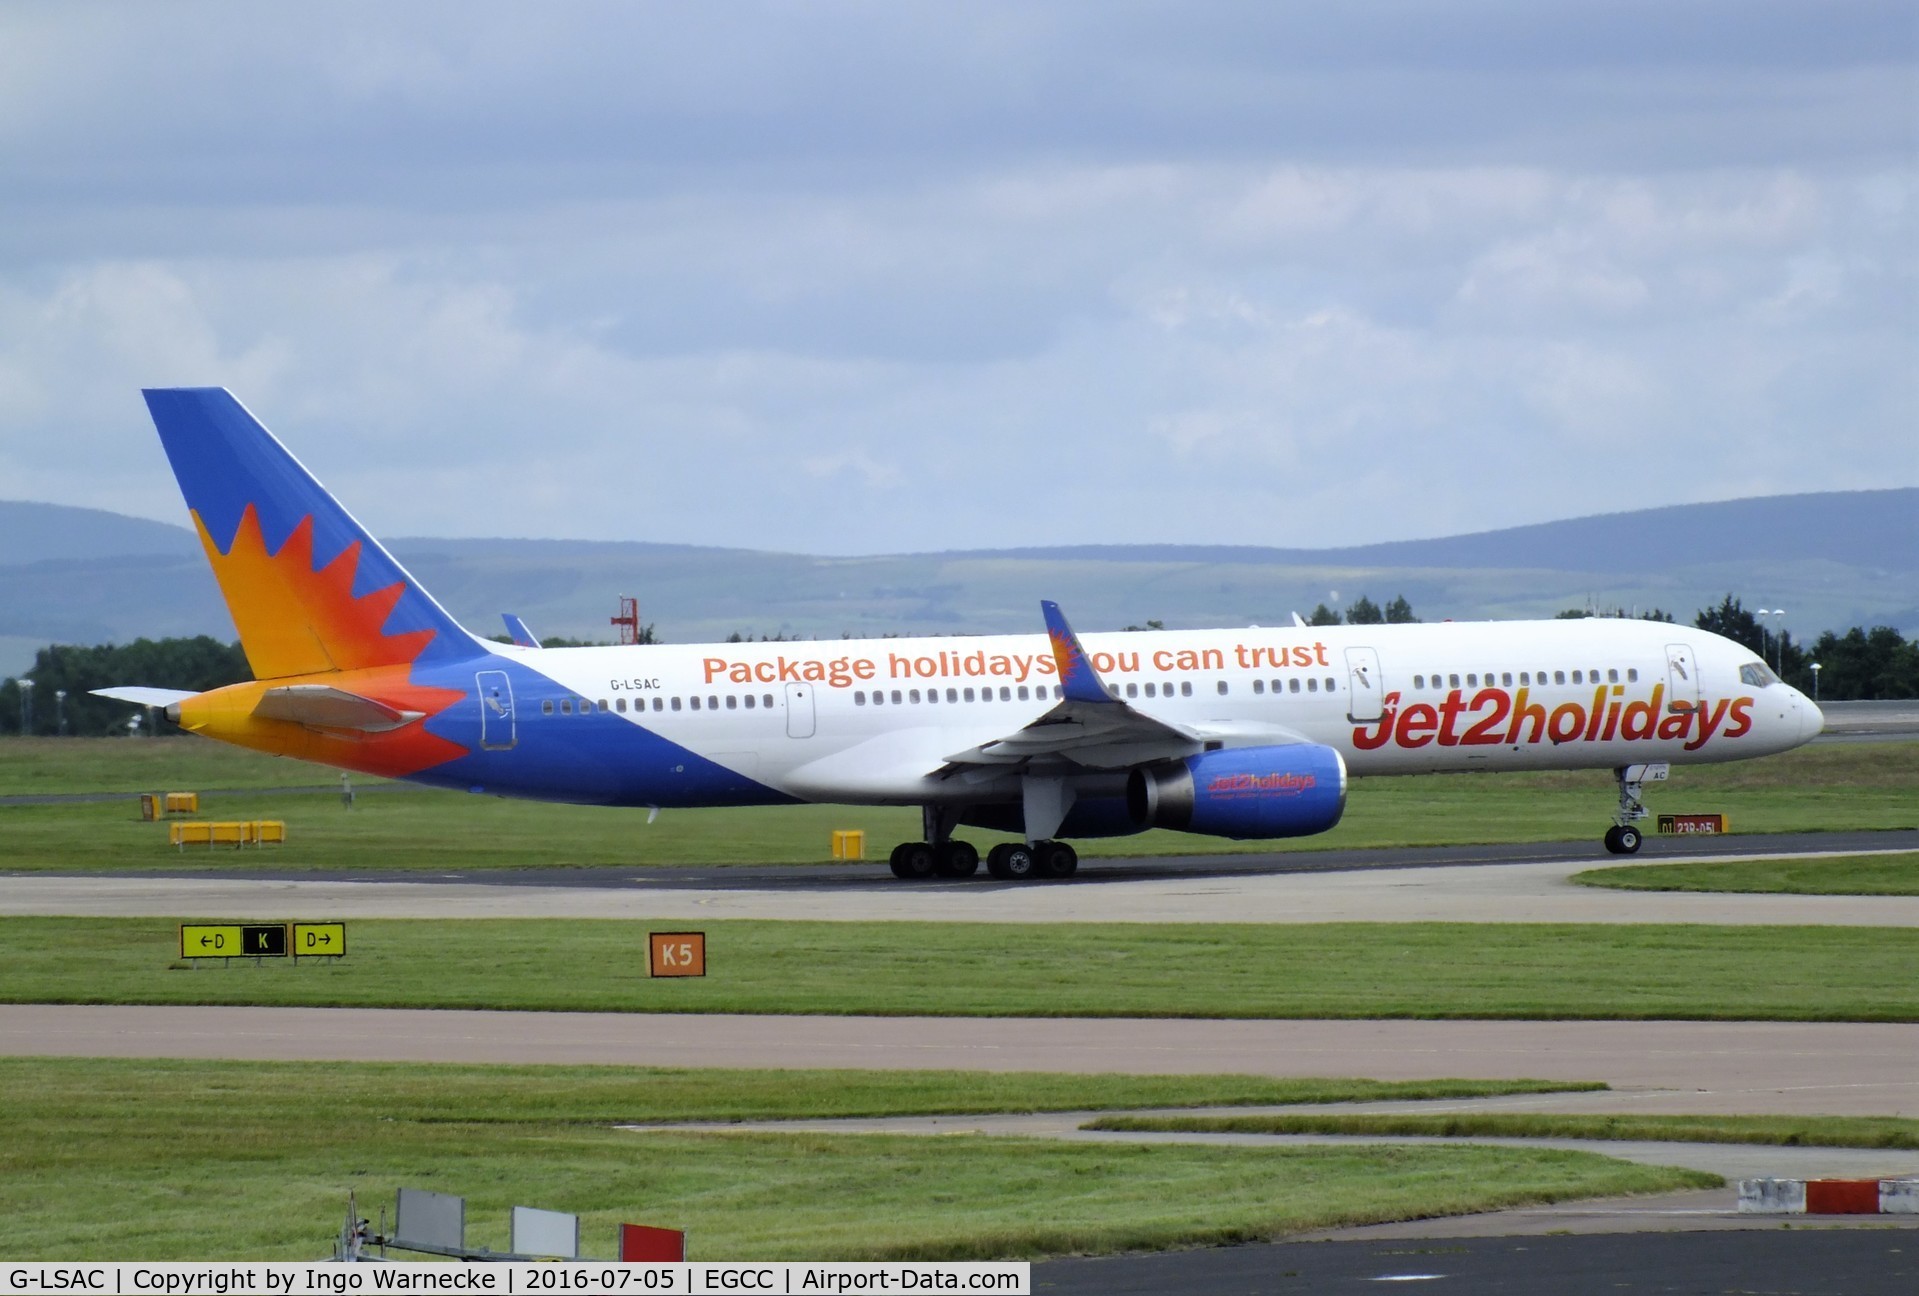 G-LSAC, 1992 Boeing 757-23A C/N 25488, Boeing 757-23A of jet2holidays at Manchester airport